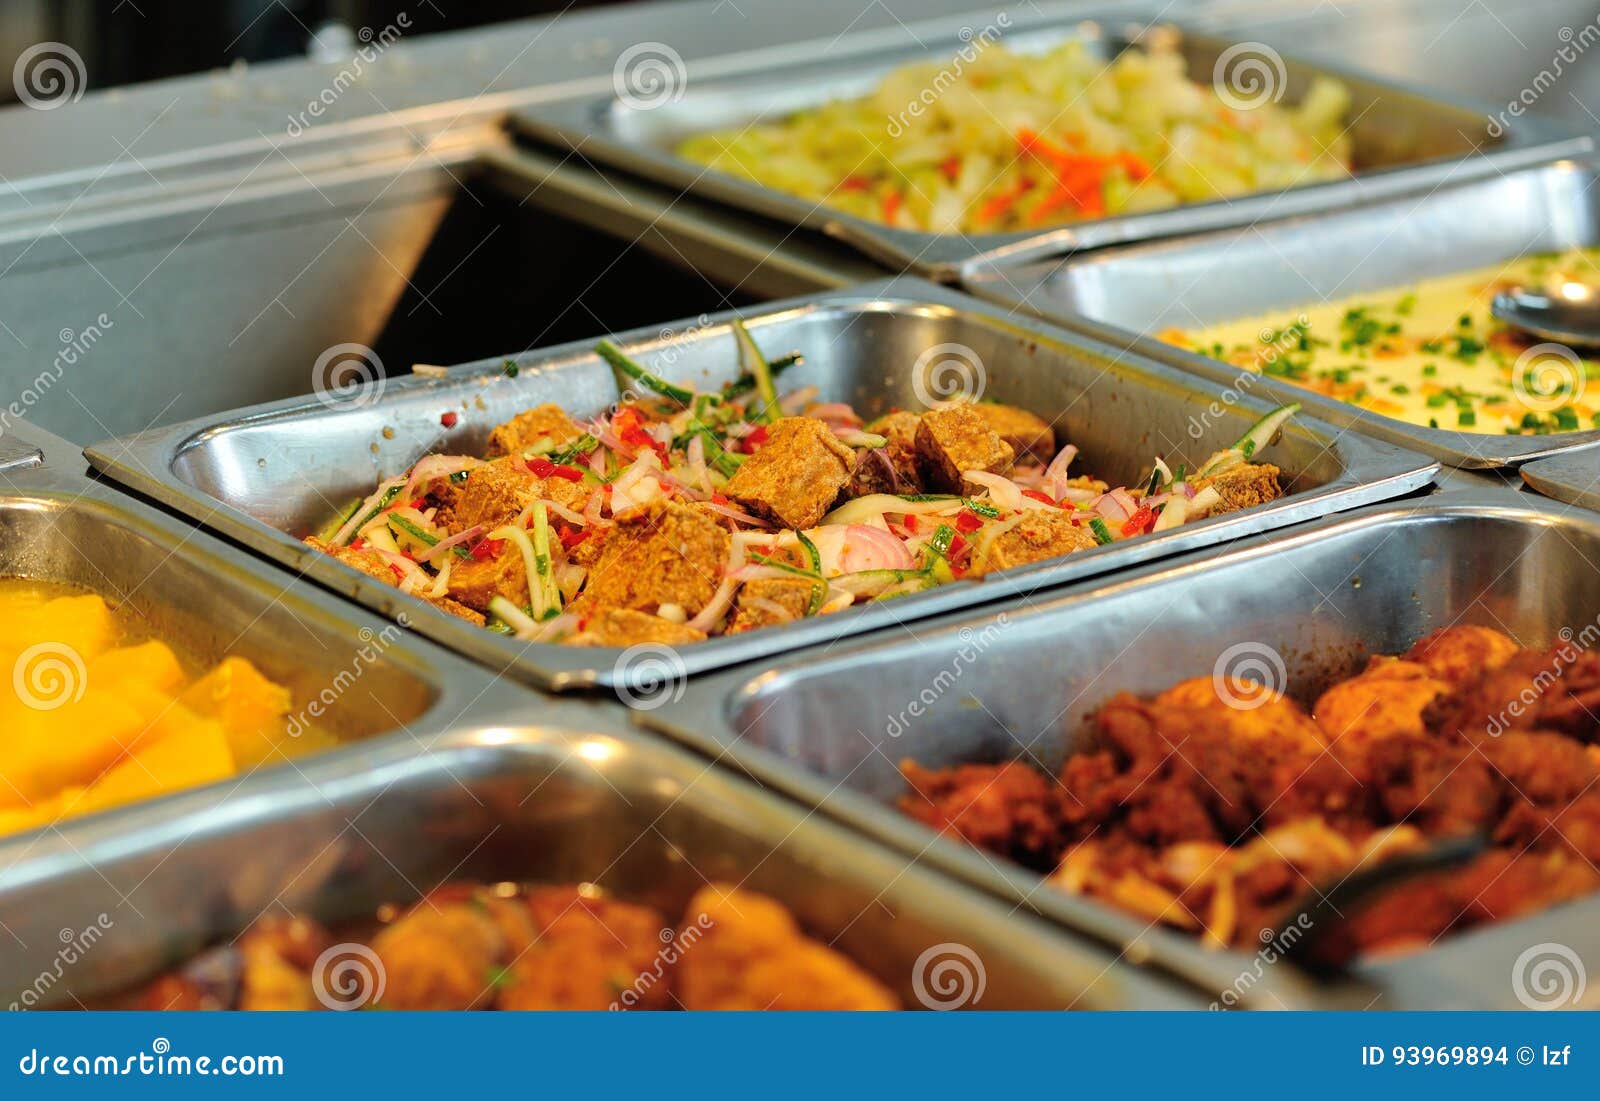 Chinese Fast Food Buffet Food Stock Photo - Image of flavor, lunch: 93969894